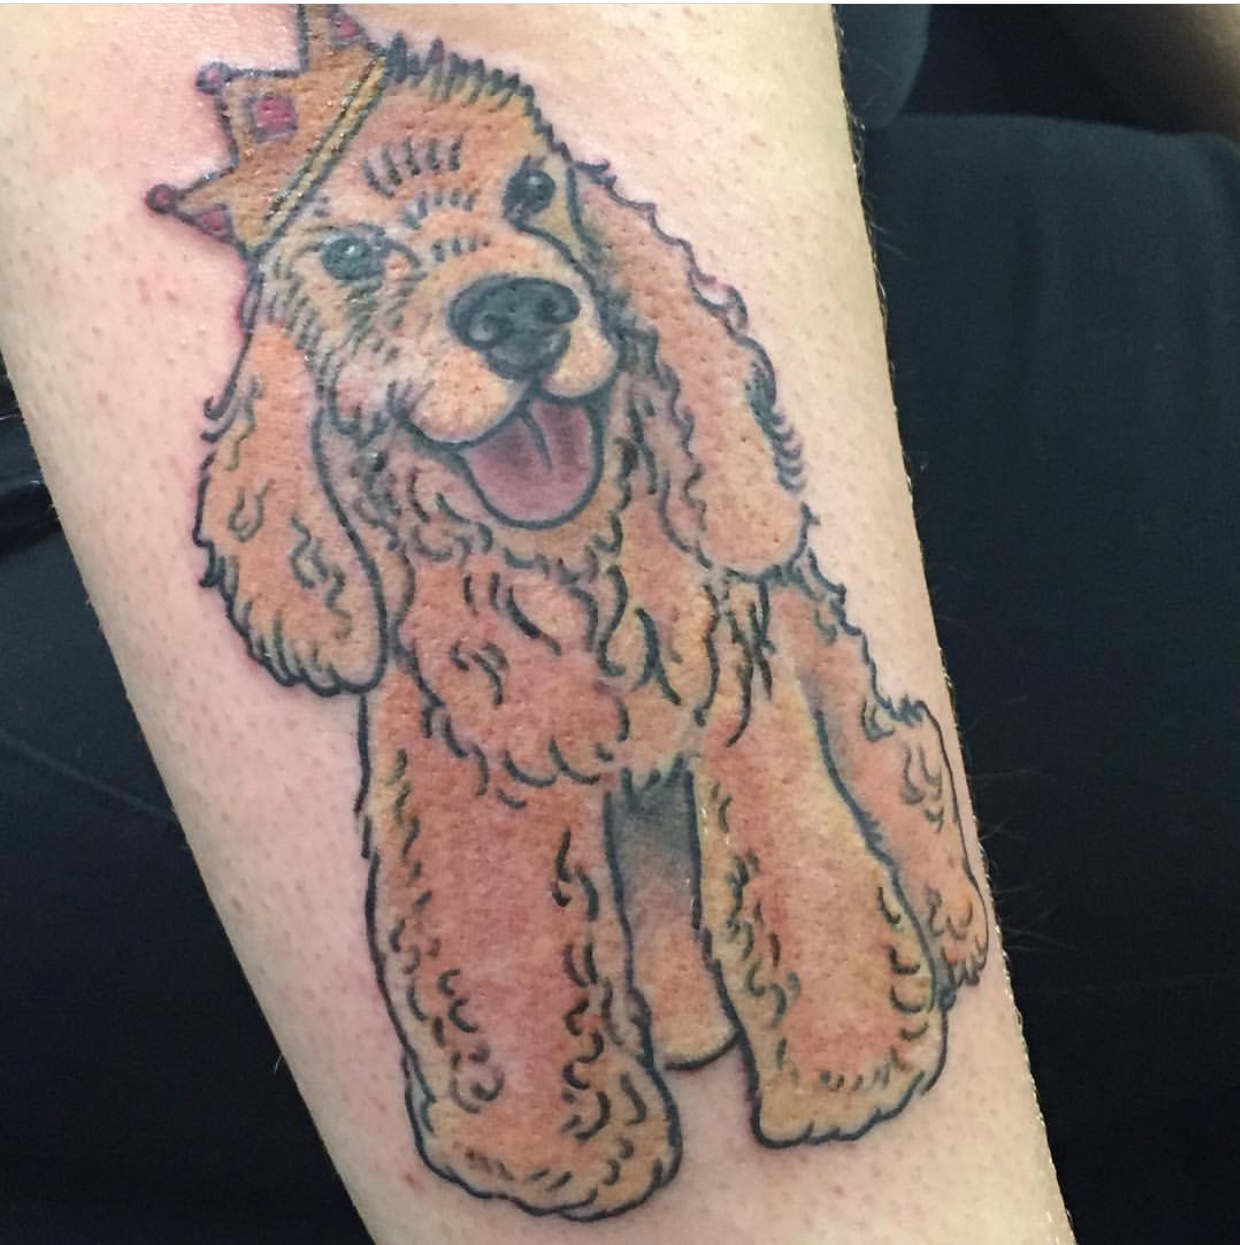 smiling Cocker Spaniel wearing a crown tattoo on the forearm